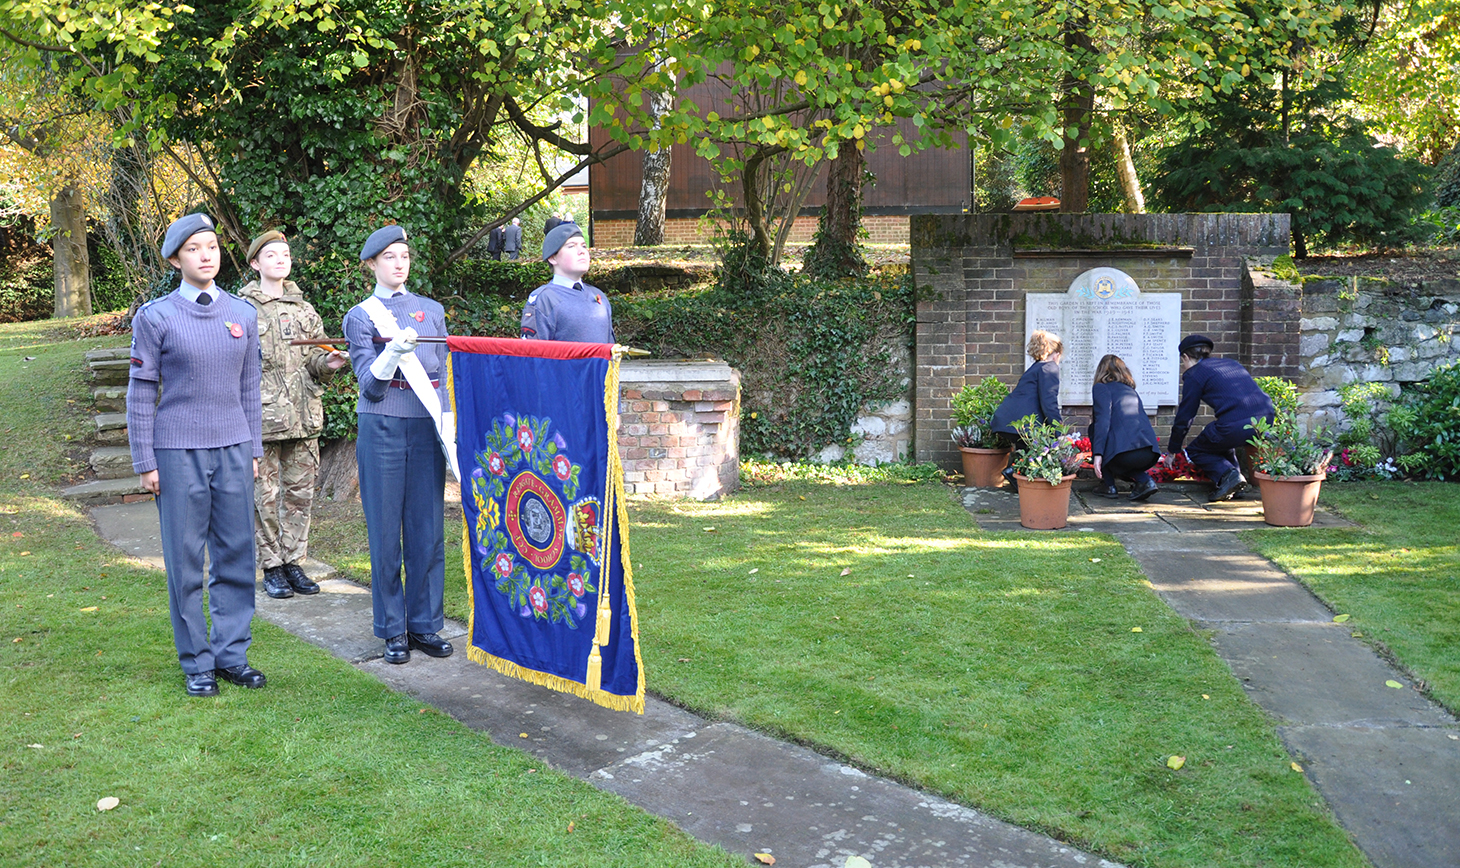 Act of Remembrance Service